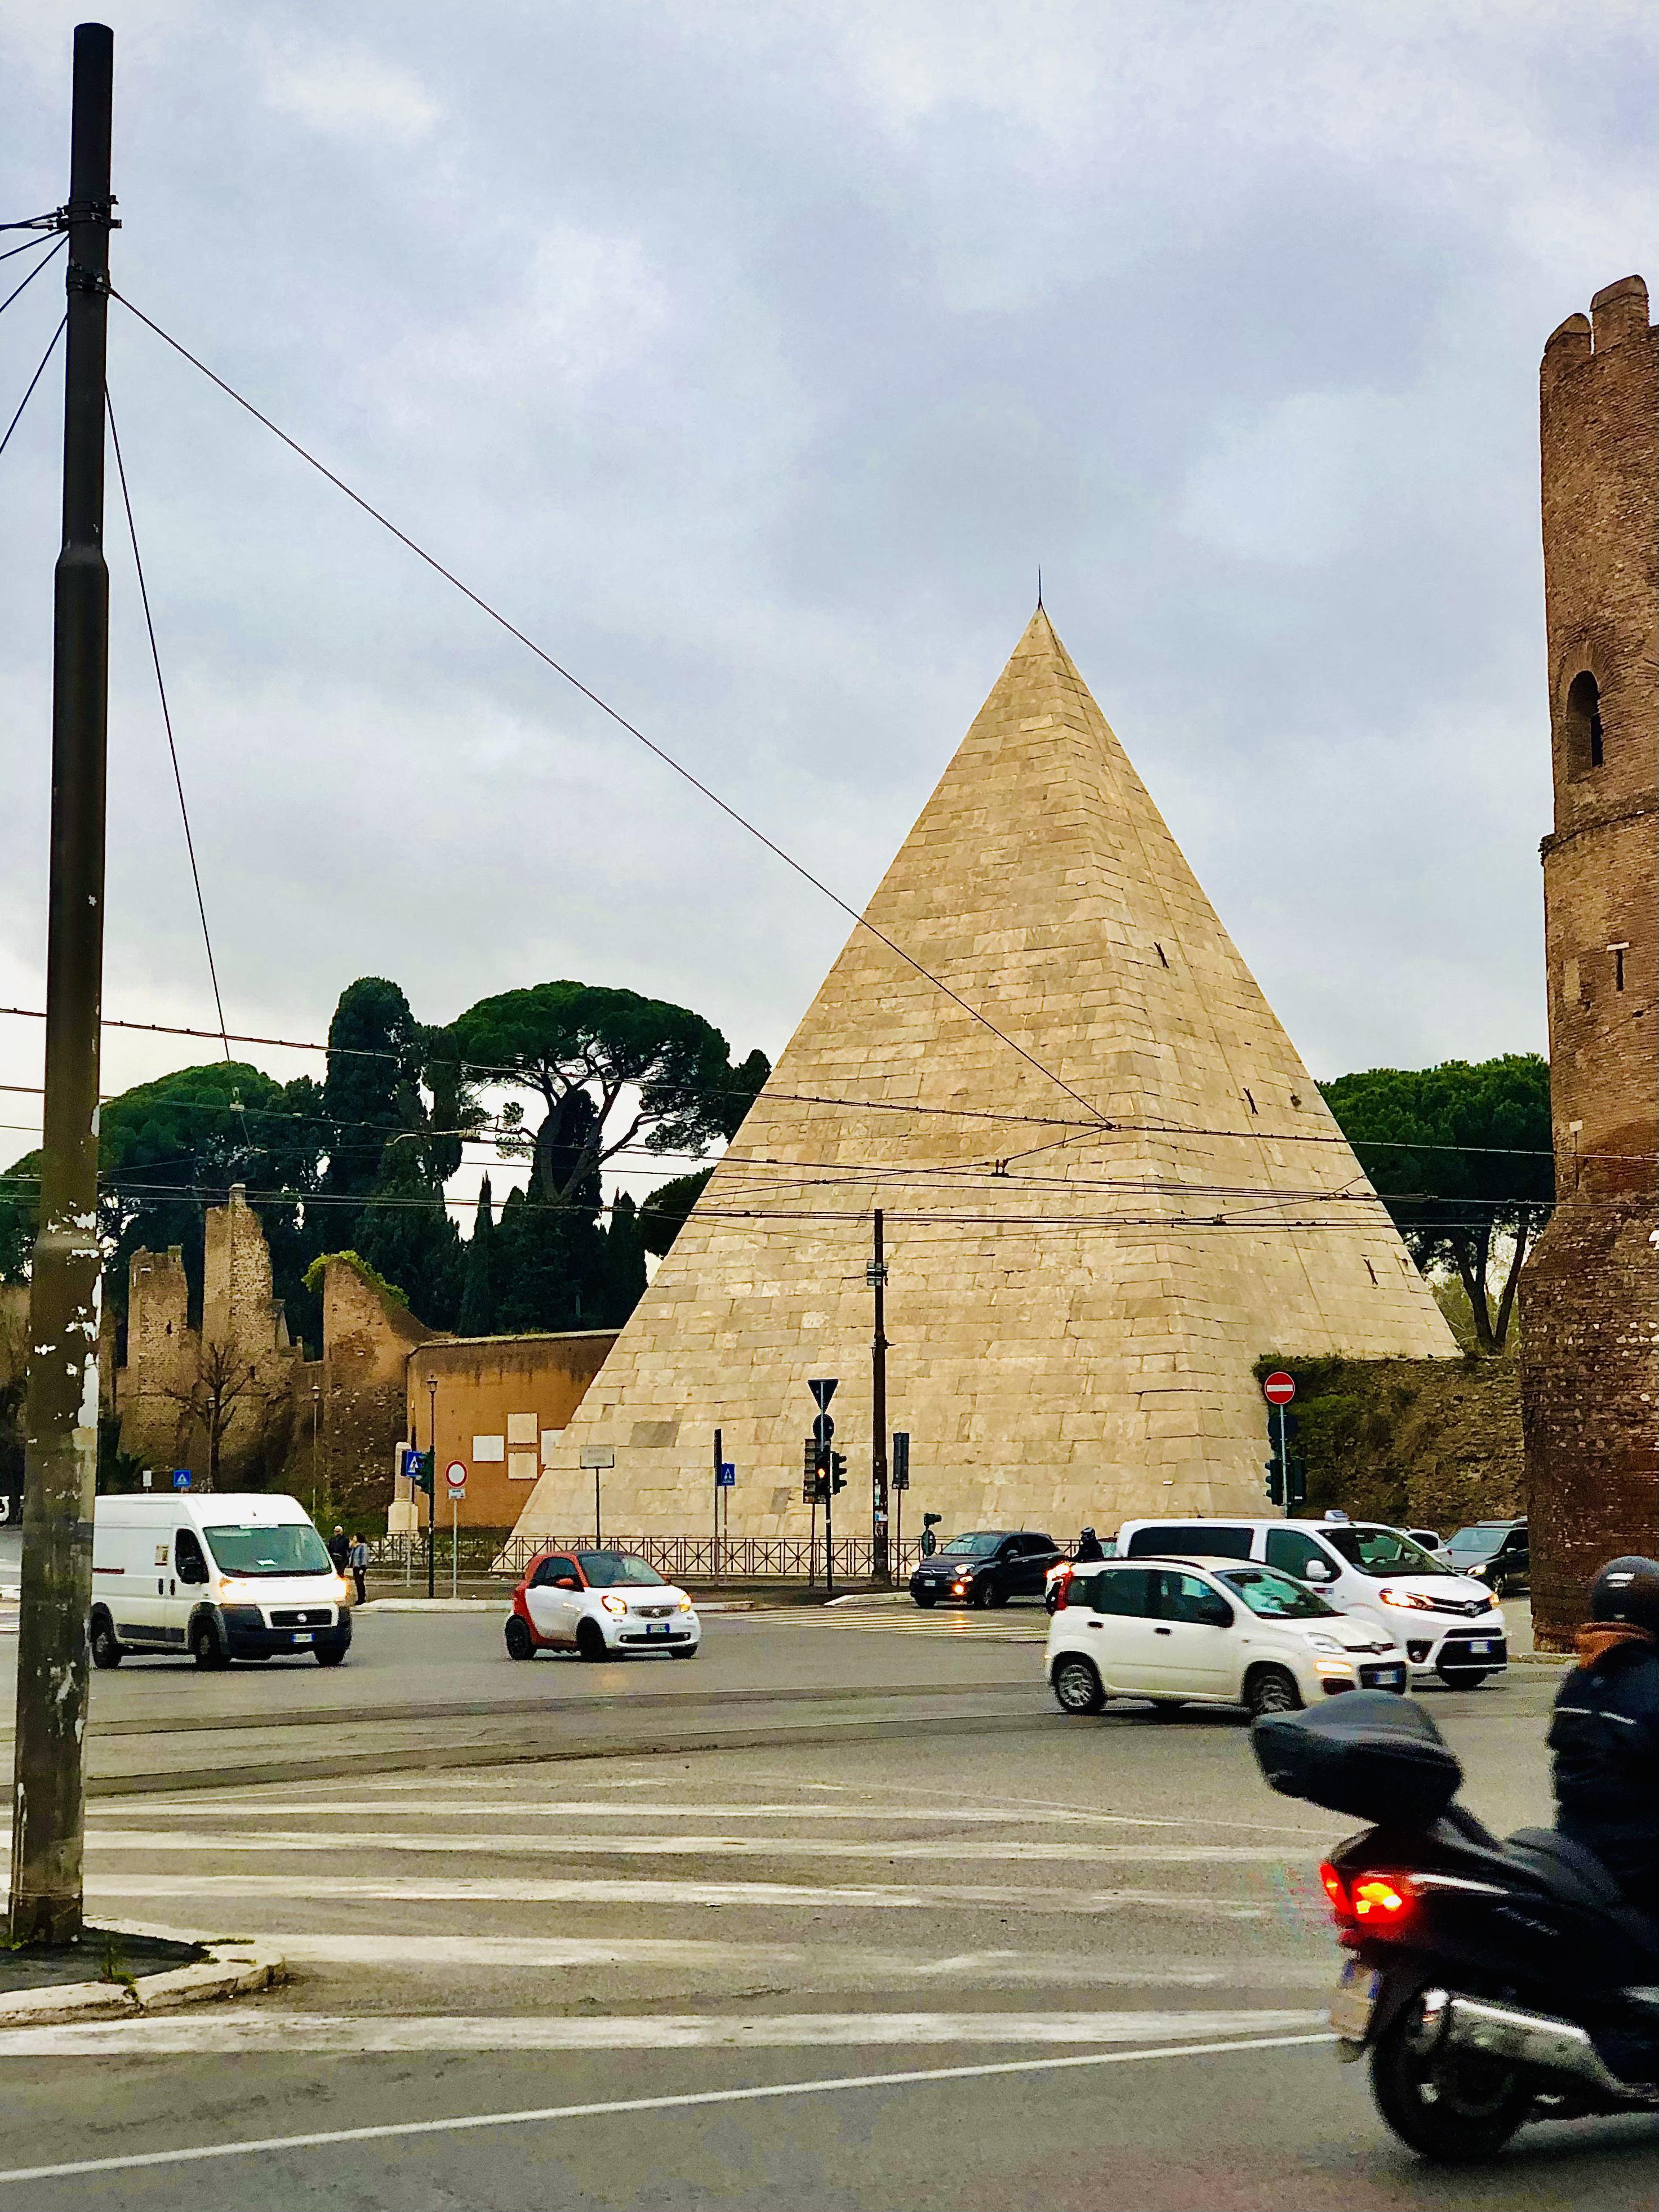 Pyramid of Cestius, built as a tomb for the Roman preator Gaius Cestius ca. 12 BC. Later incorporated into the Aurelian Walls, as a triangular bastion. Rome, Italy